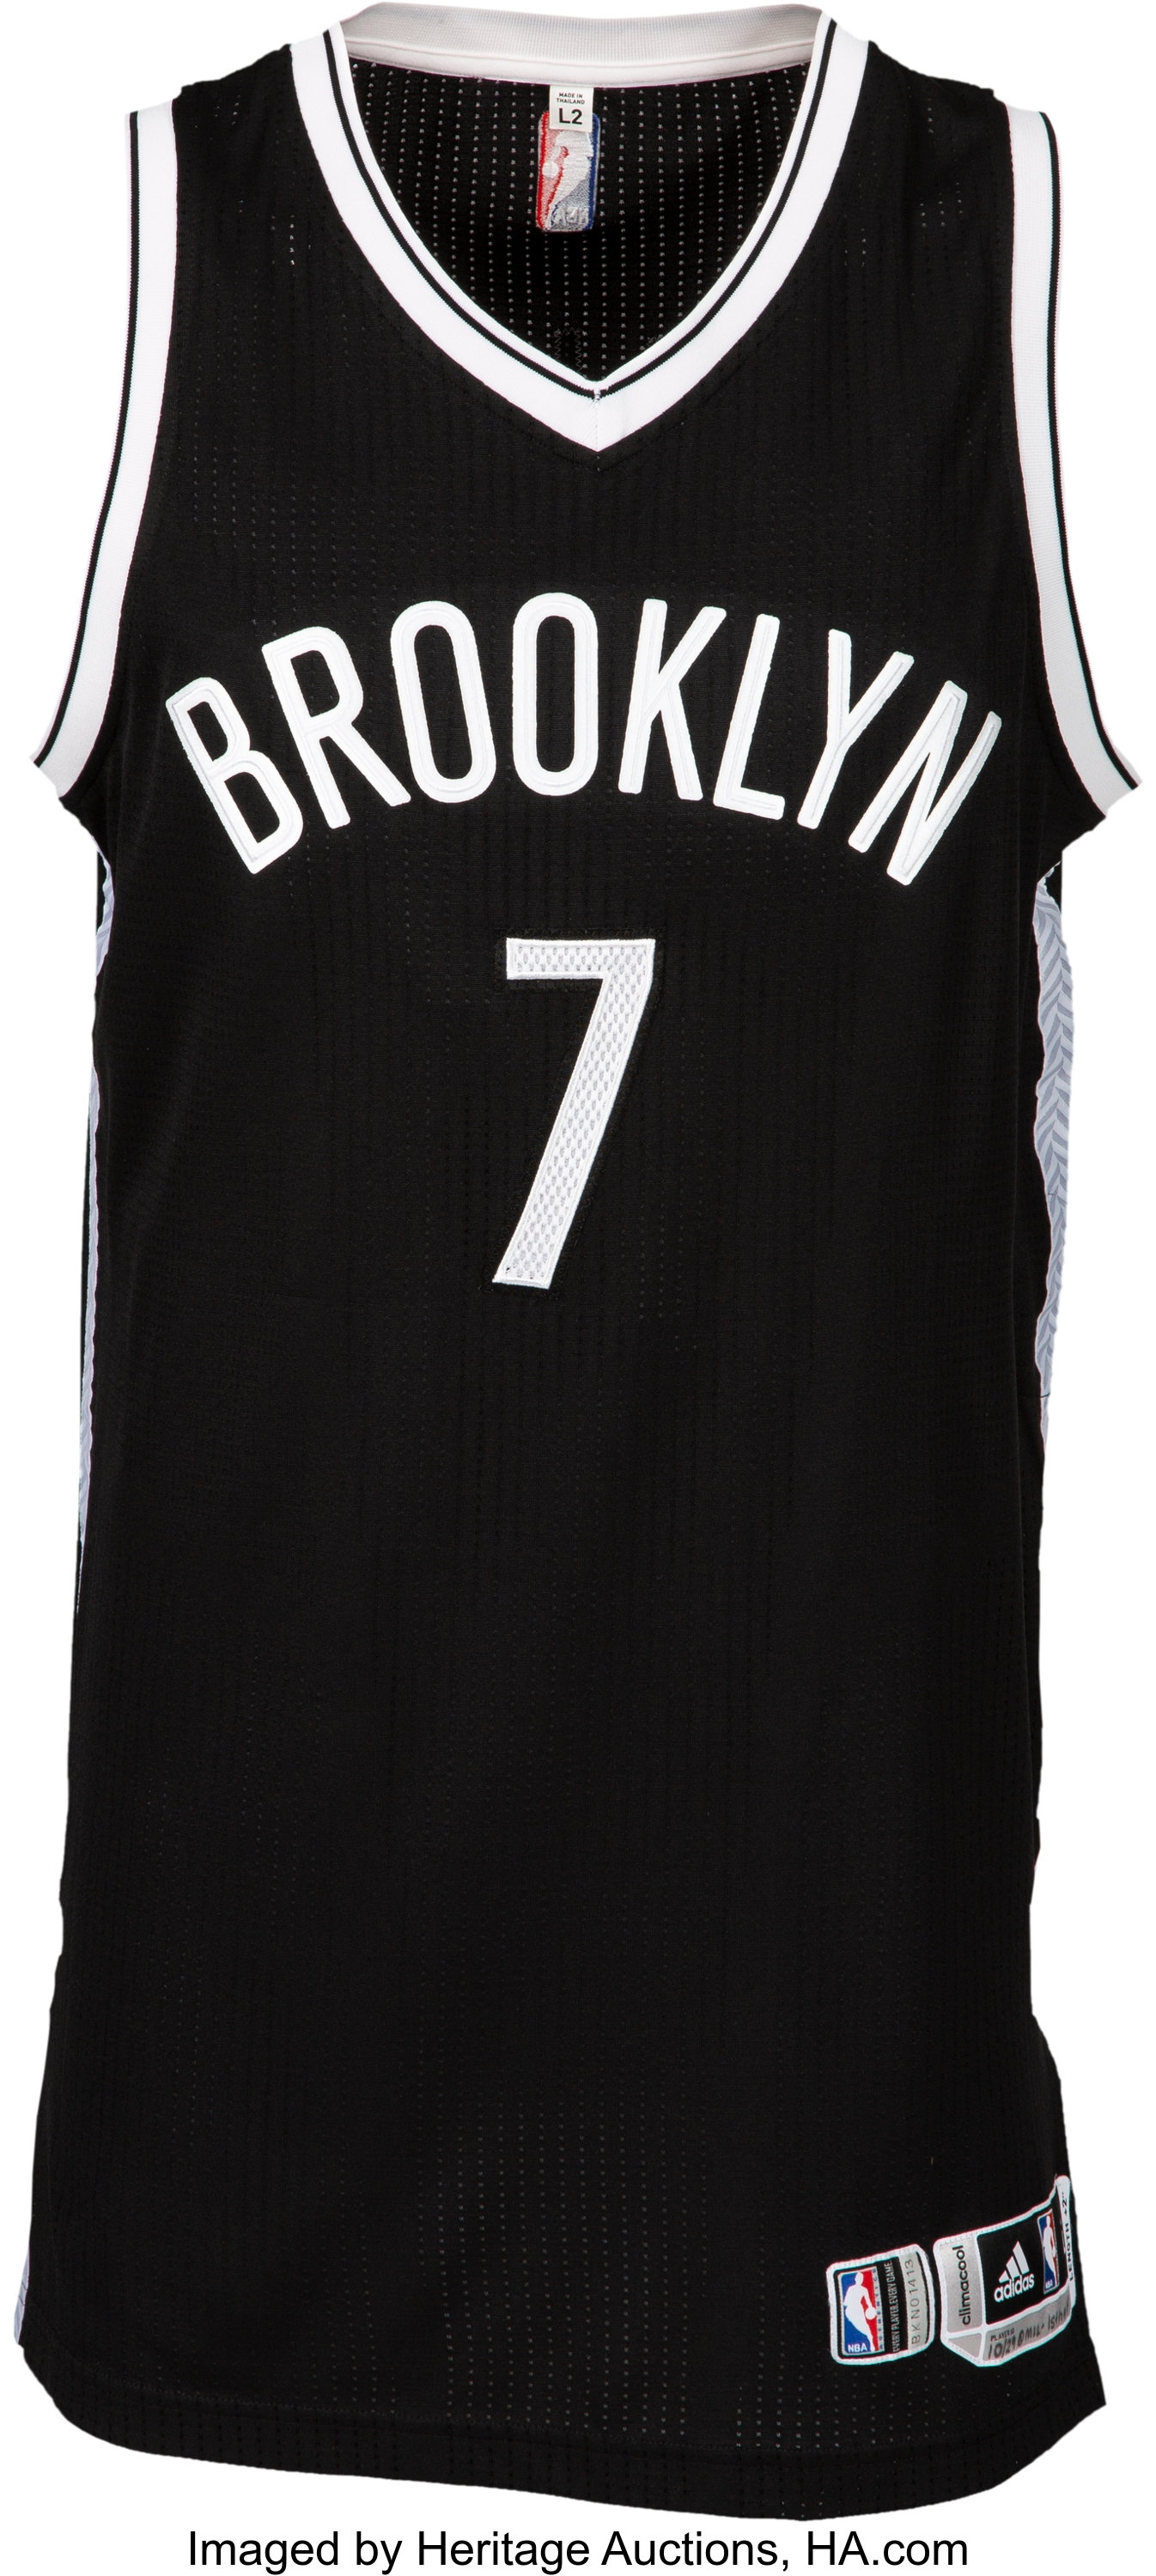 Jeremy Lin's Emergence Ignites Scramble to Retail His Jersey - The